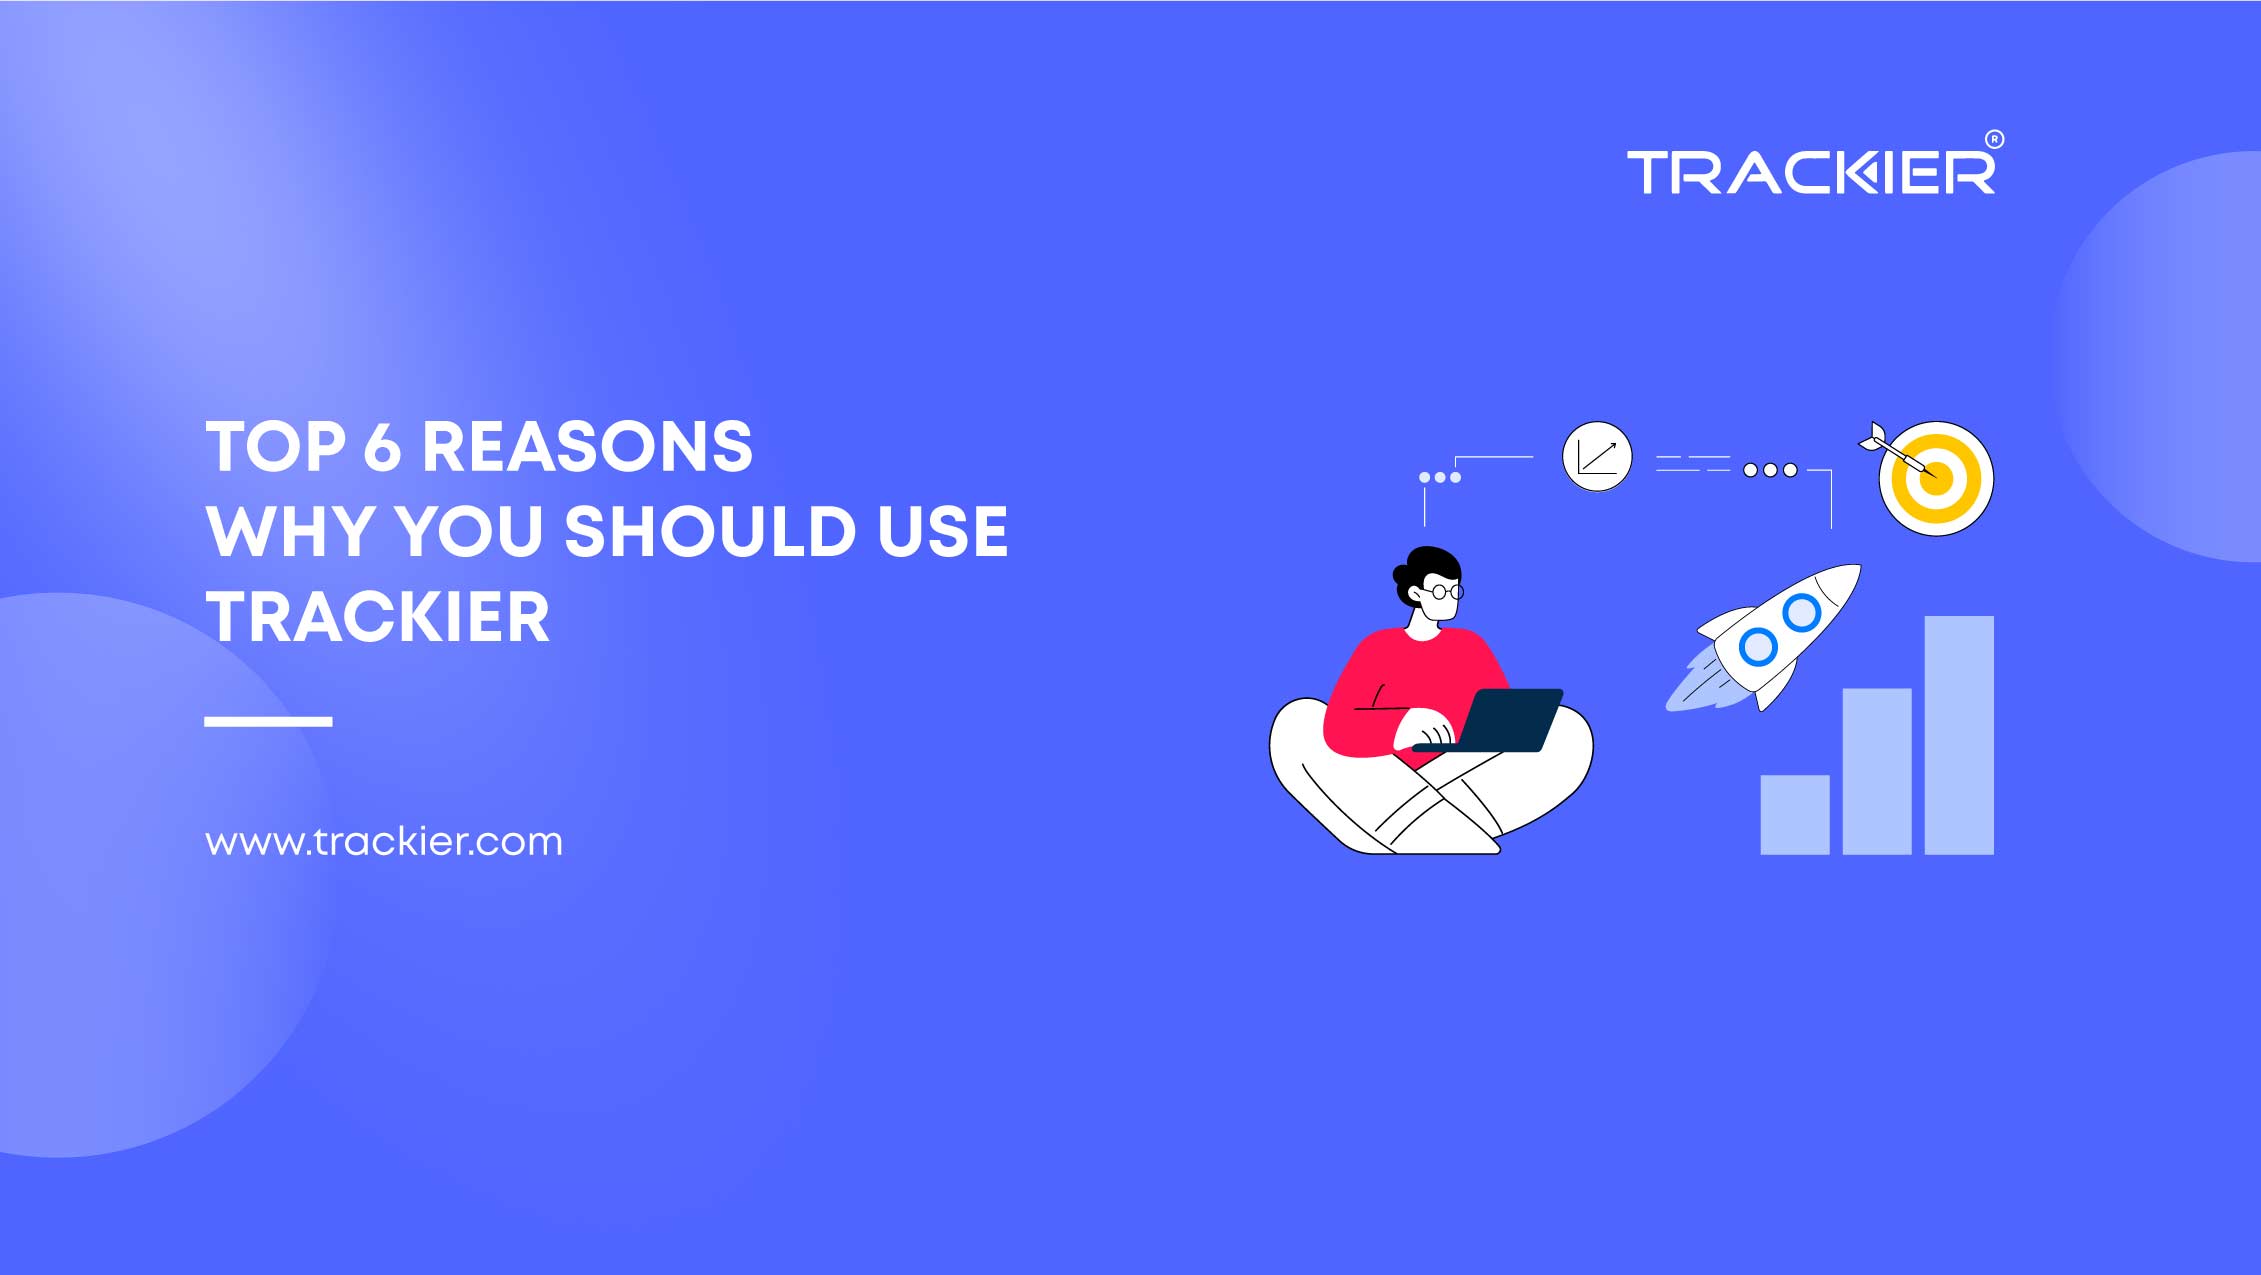 Top 6 Reasons Why You Should Use Trackier